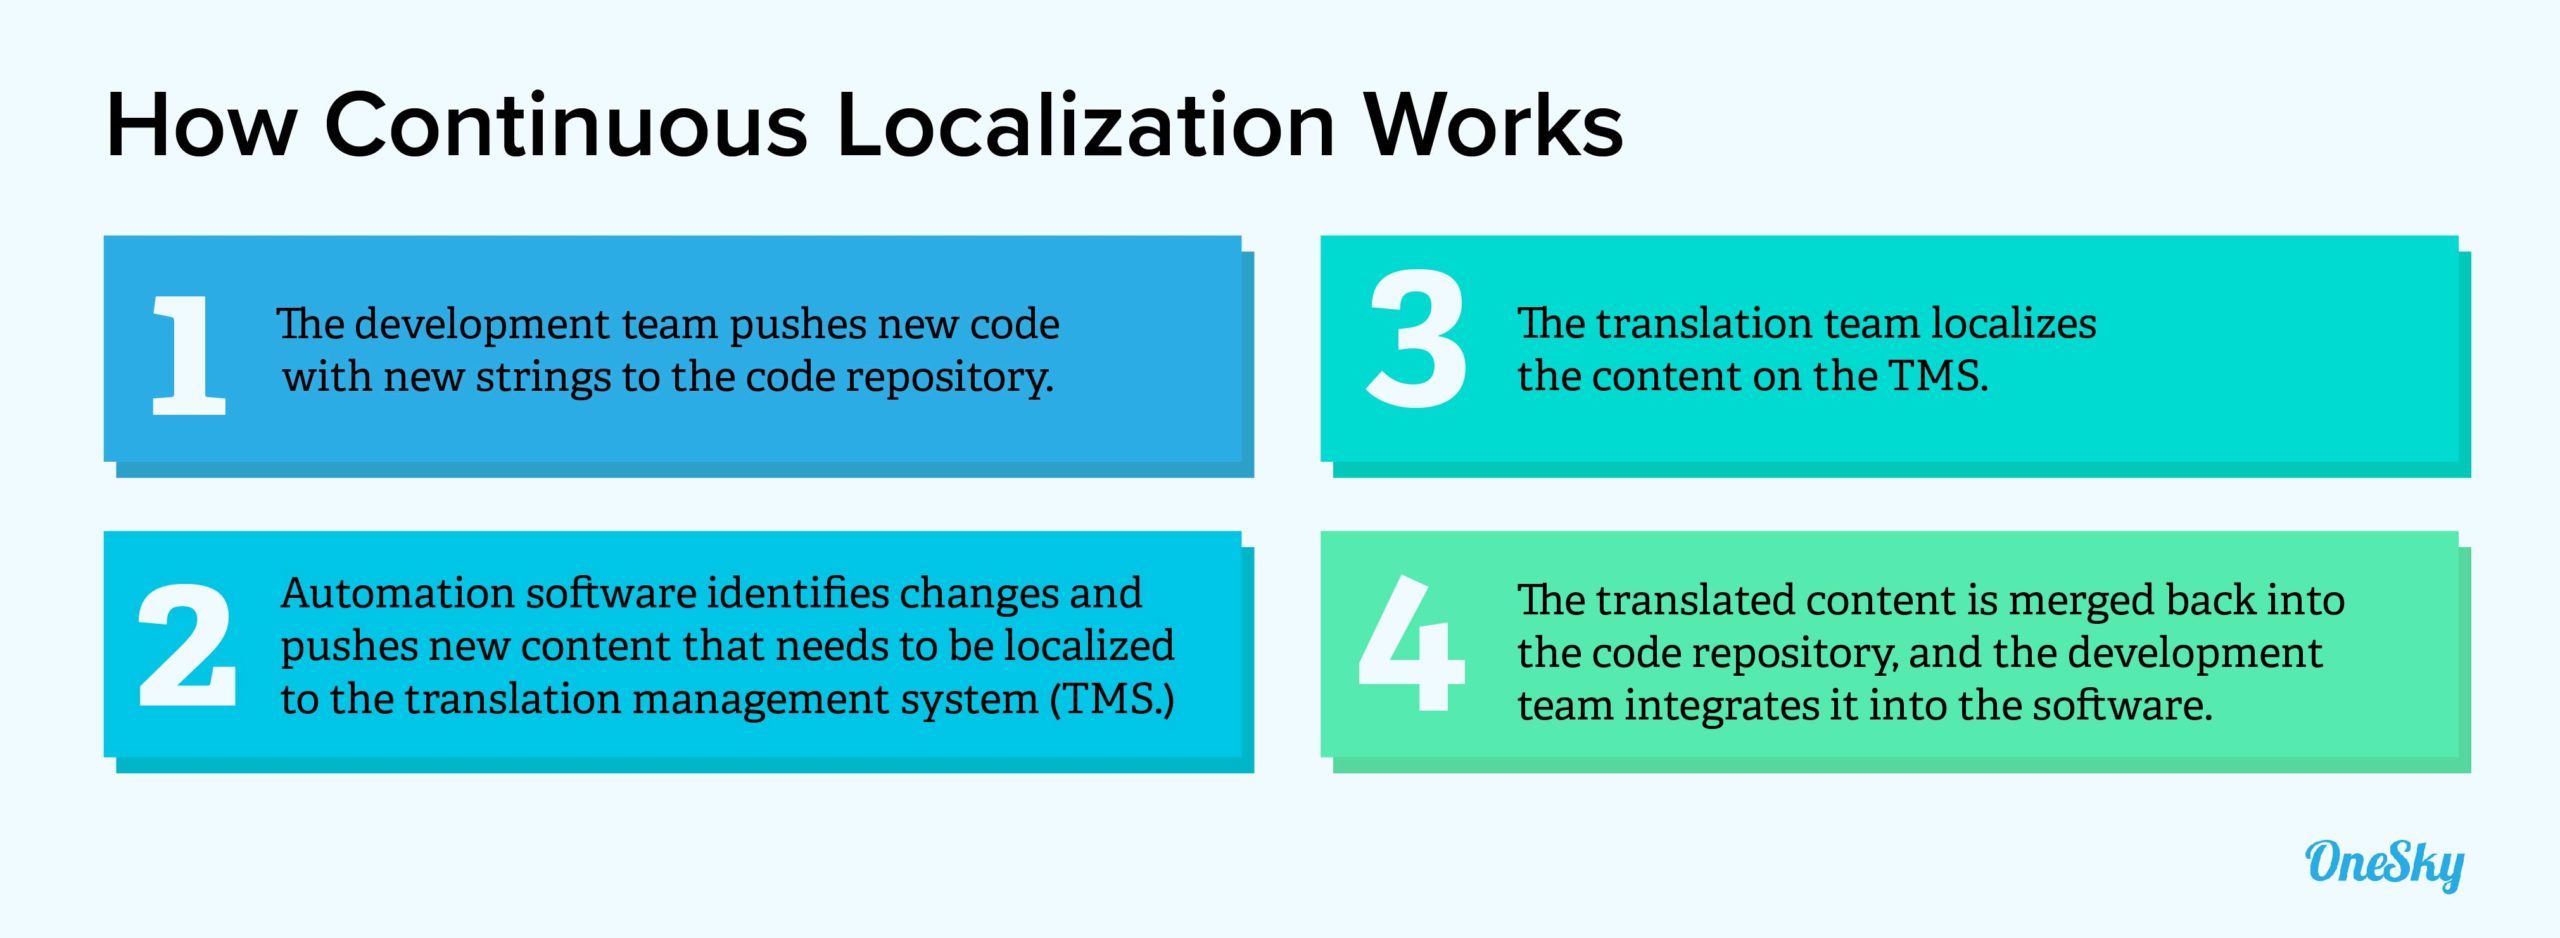 how continuous localization works